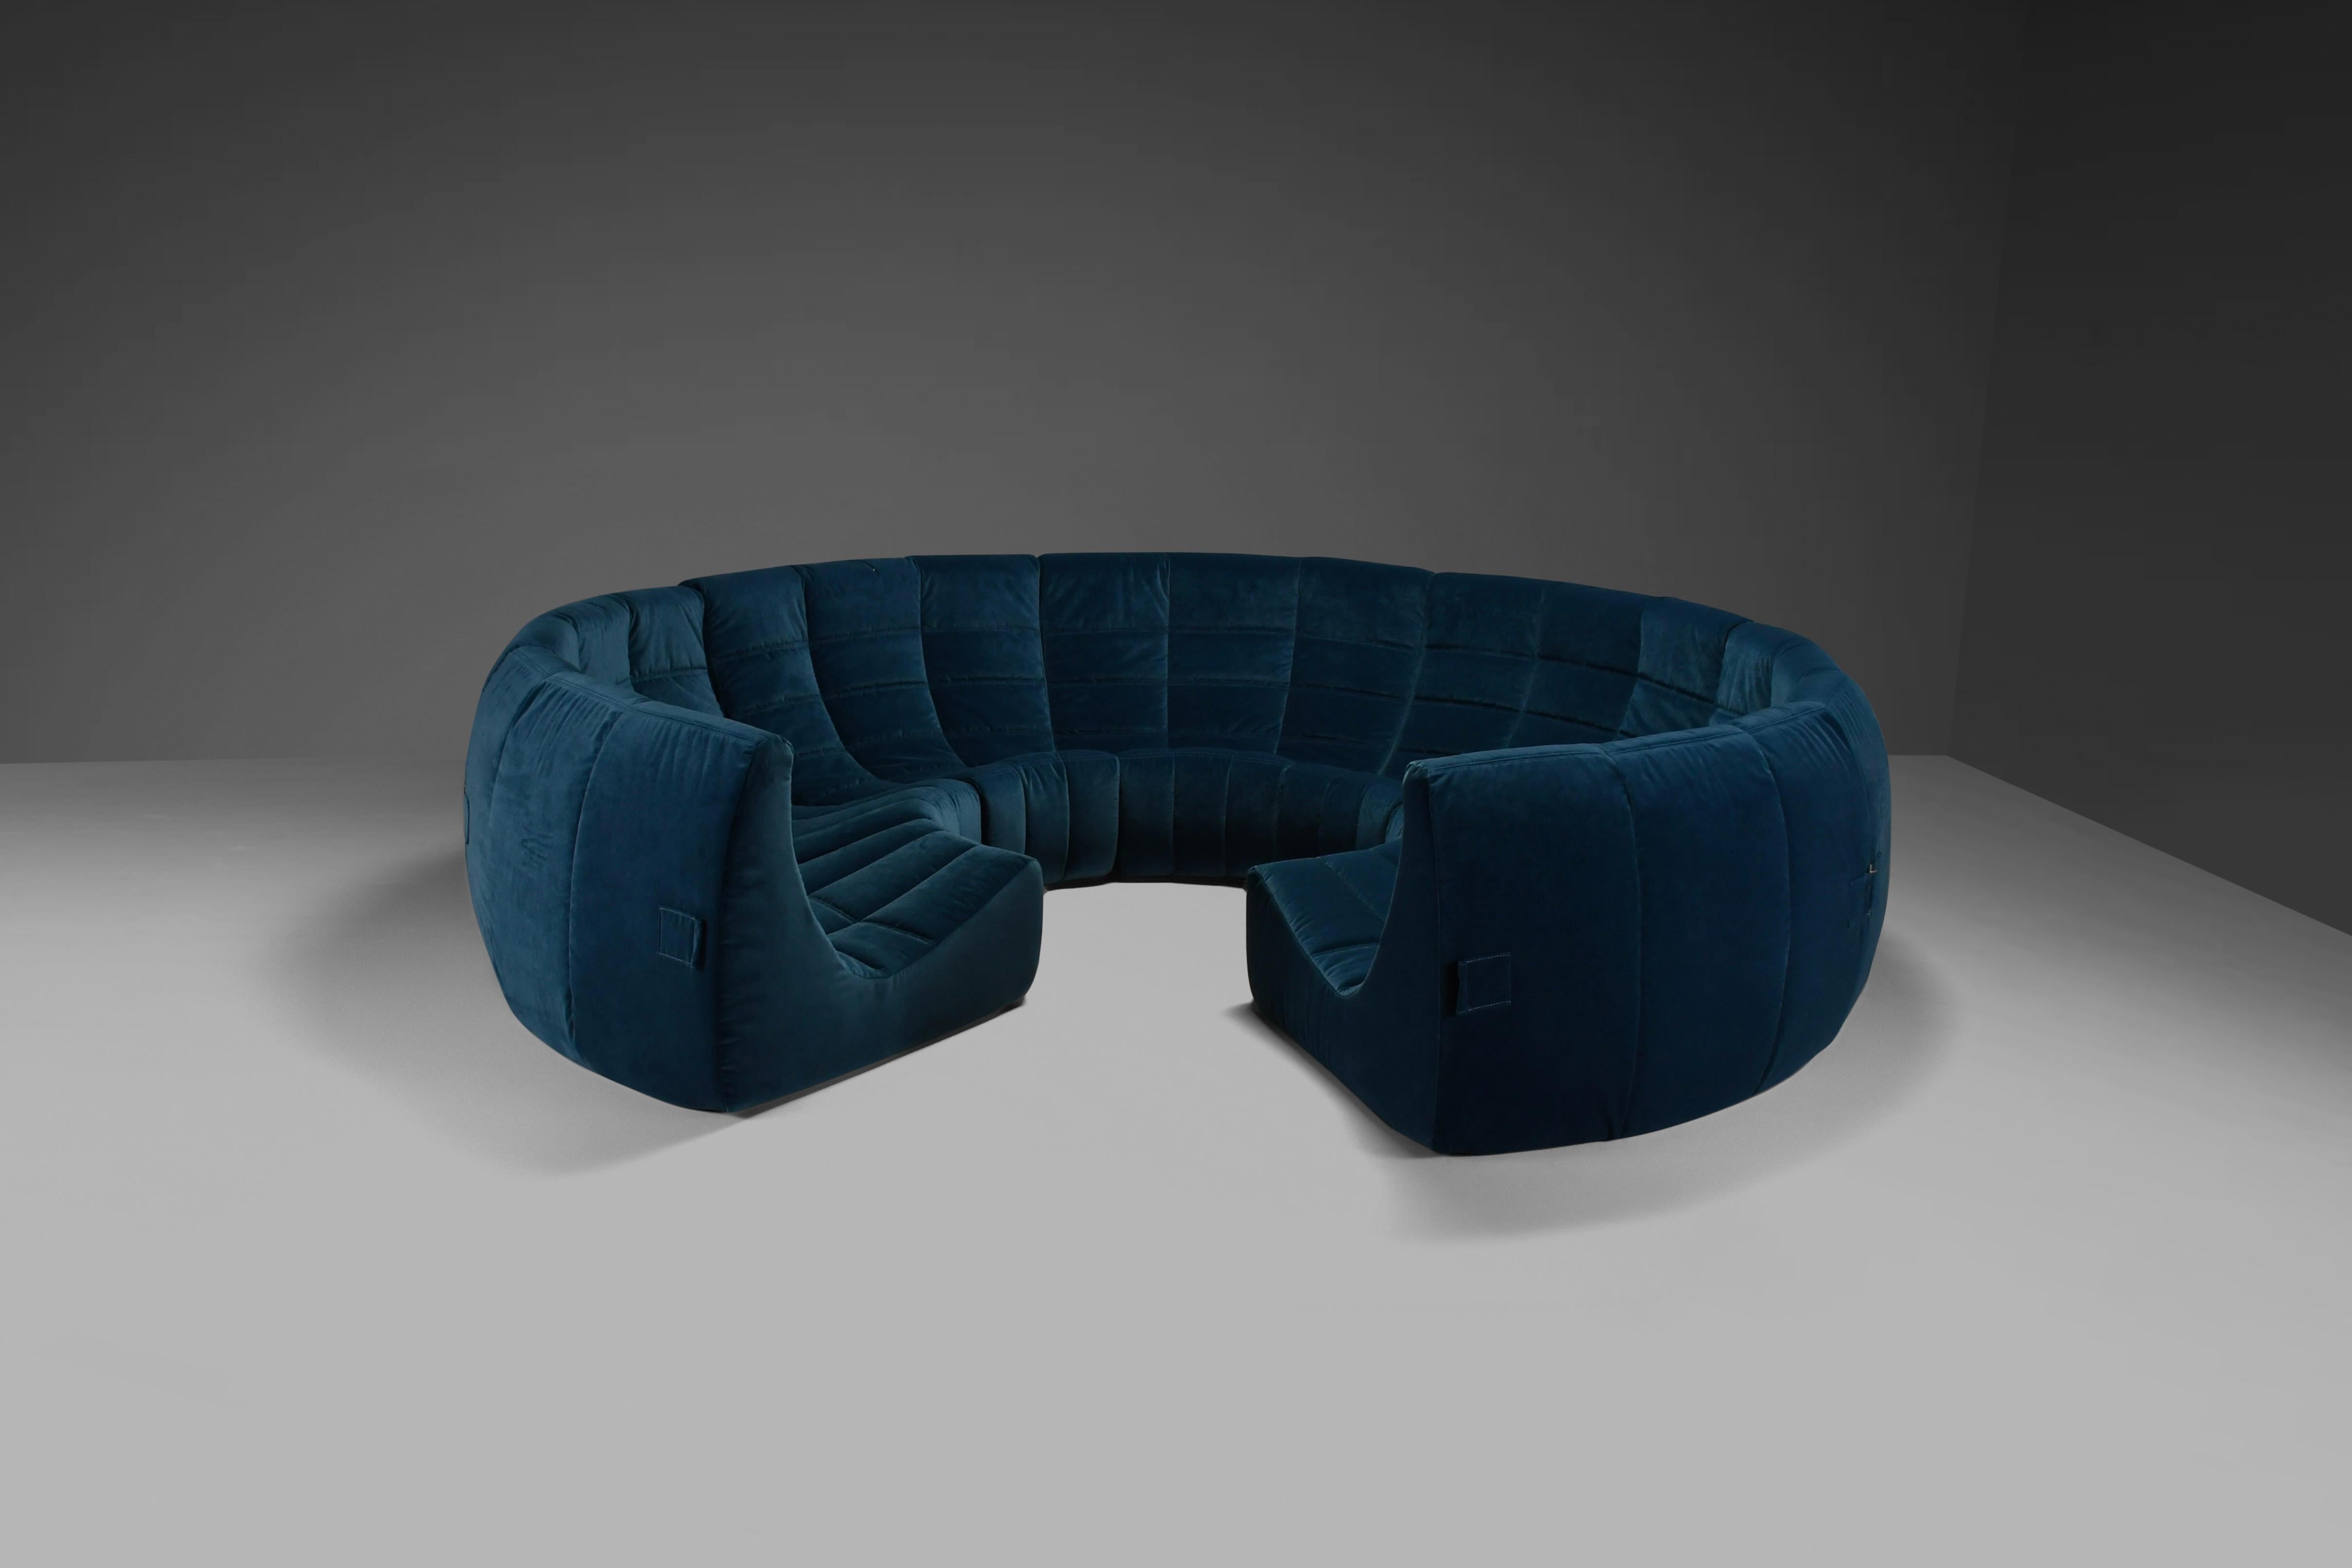 Very rare extra large 'Gilda' circle sofa in excellent condition.

Designed by Michel Ducaroy in 1972.

The sofa is manufactured by 'Roset' the company name of Ligne Roset prior to 1973. 

Reupholstered in a high quality blue colored velvet which